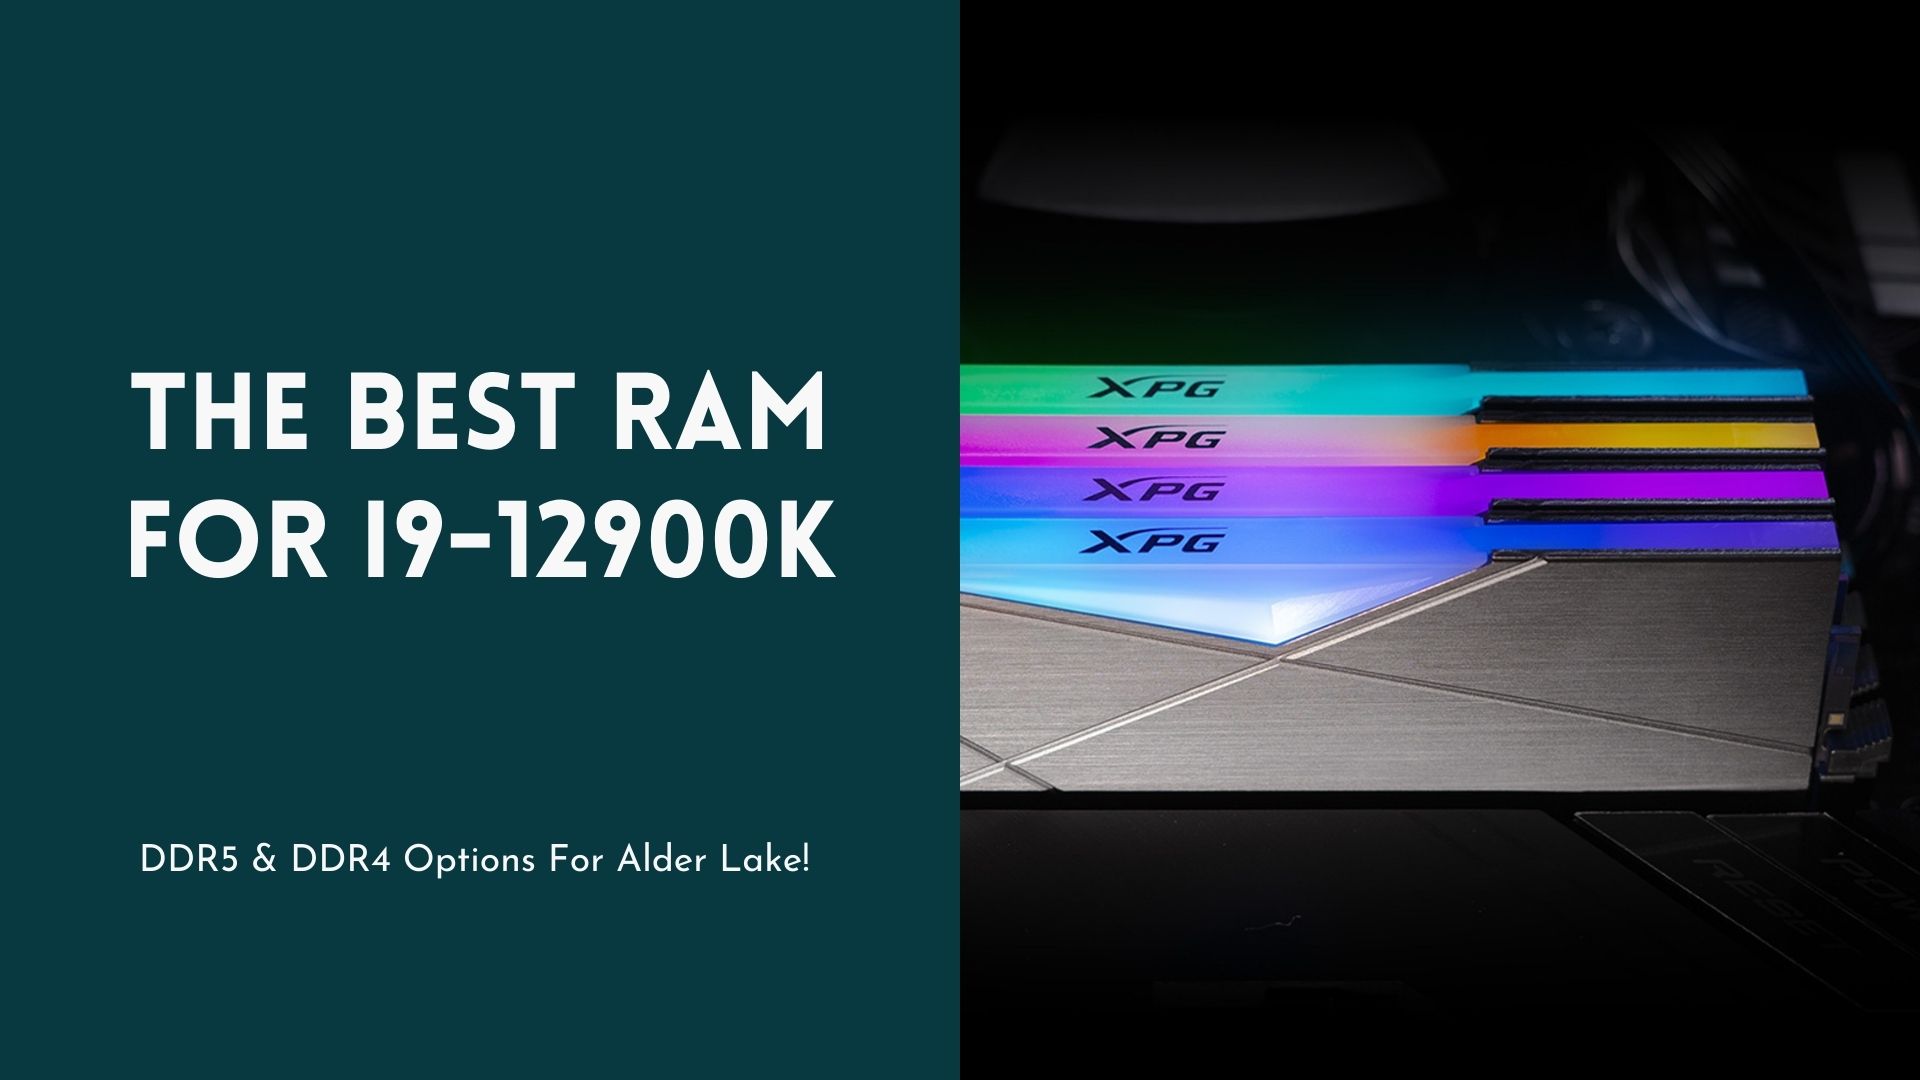 RAM For DDR5 DDR4 Options - Tech4Gamers